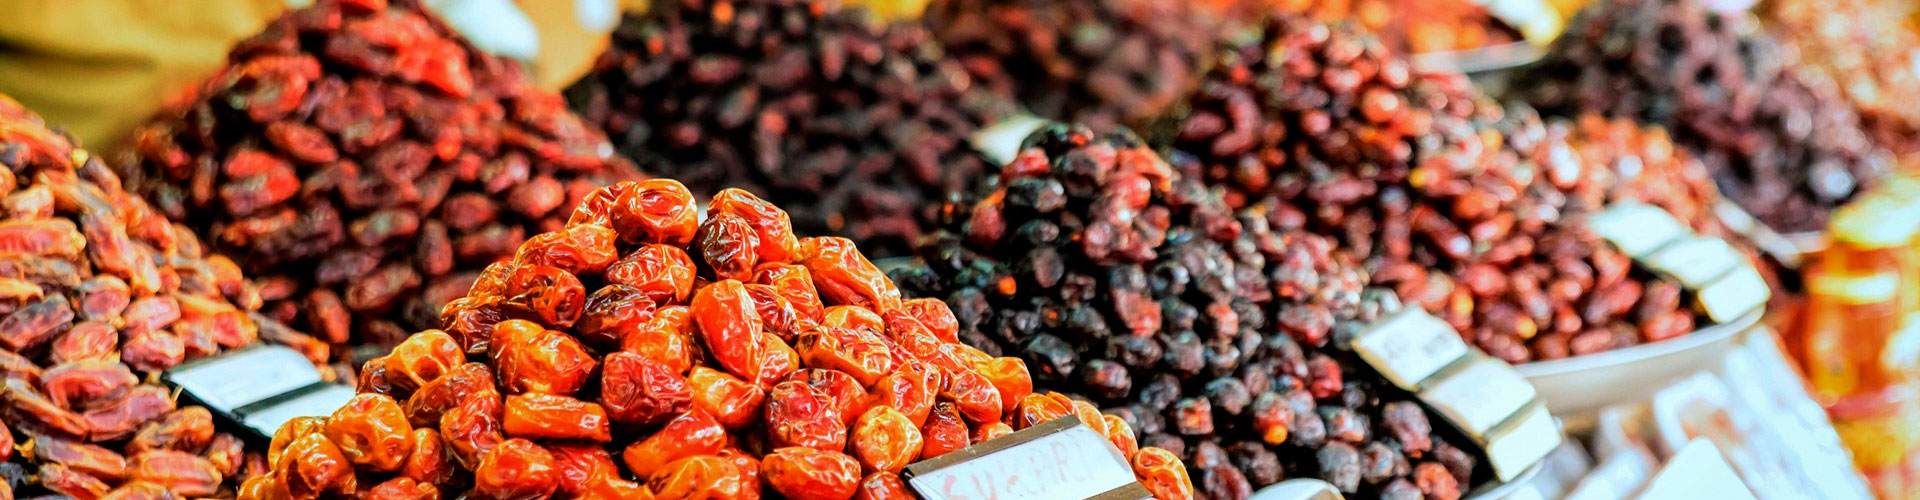 Abu Dhabi's Date Market offers 120 date varieties in cooled shops, a haven for date enthusiasts seeking diverse flavors and bulk purchases.